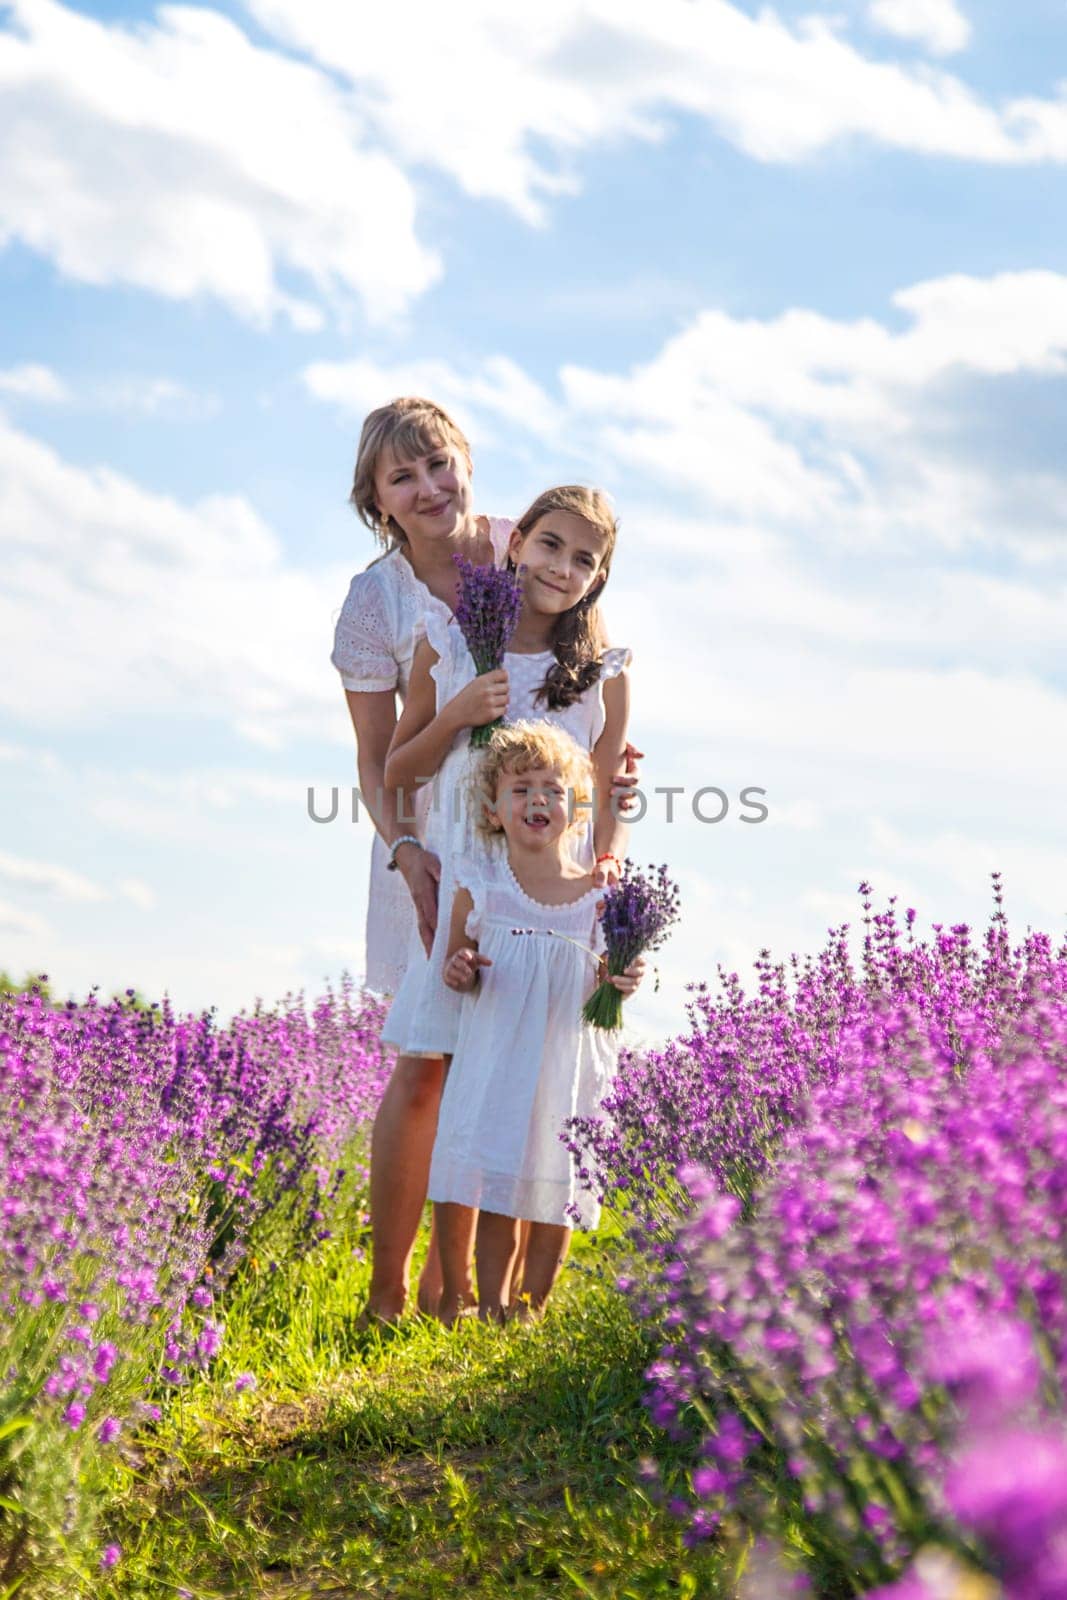 Mother and children in a lavender field. Selective focus. by yanadjana